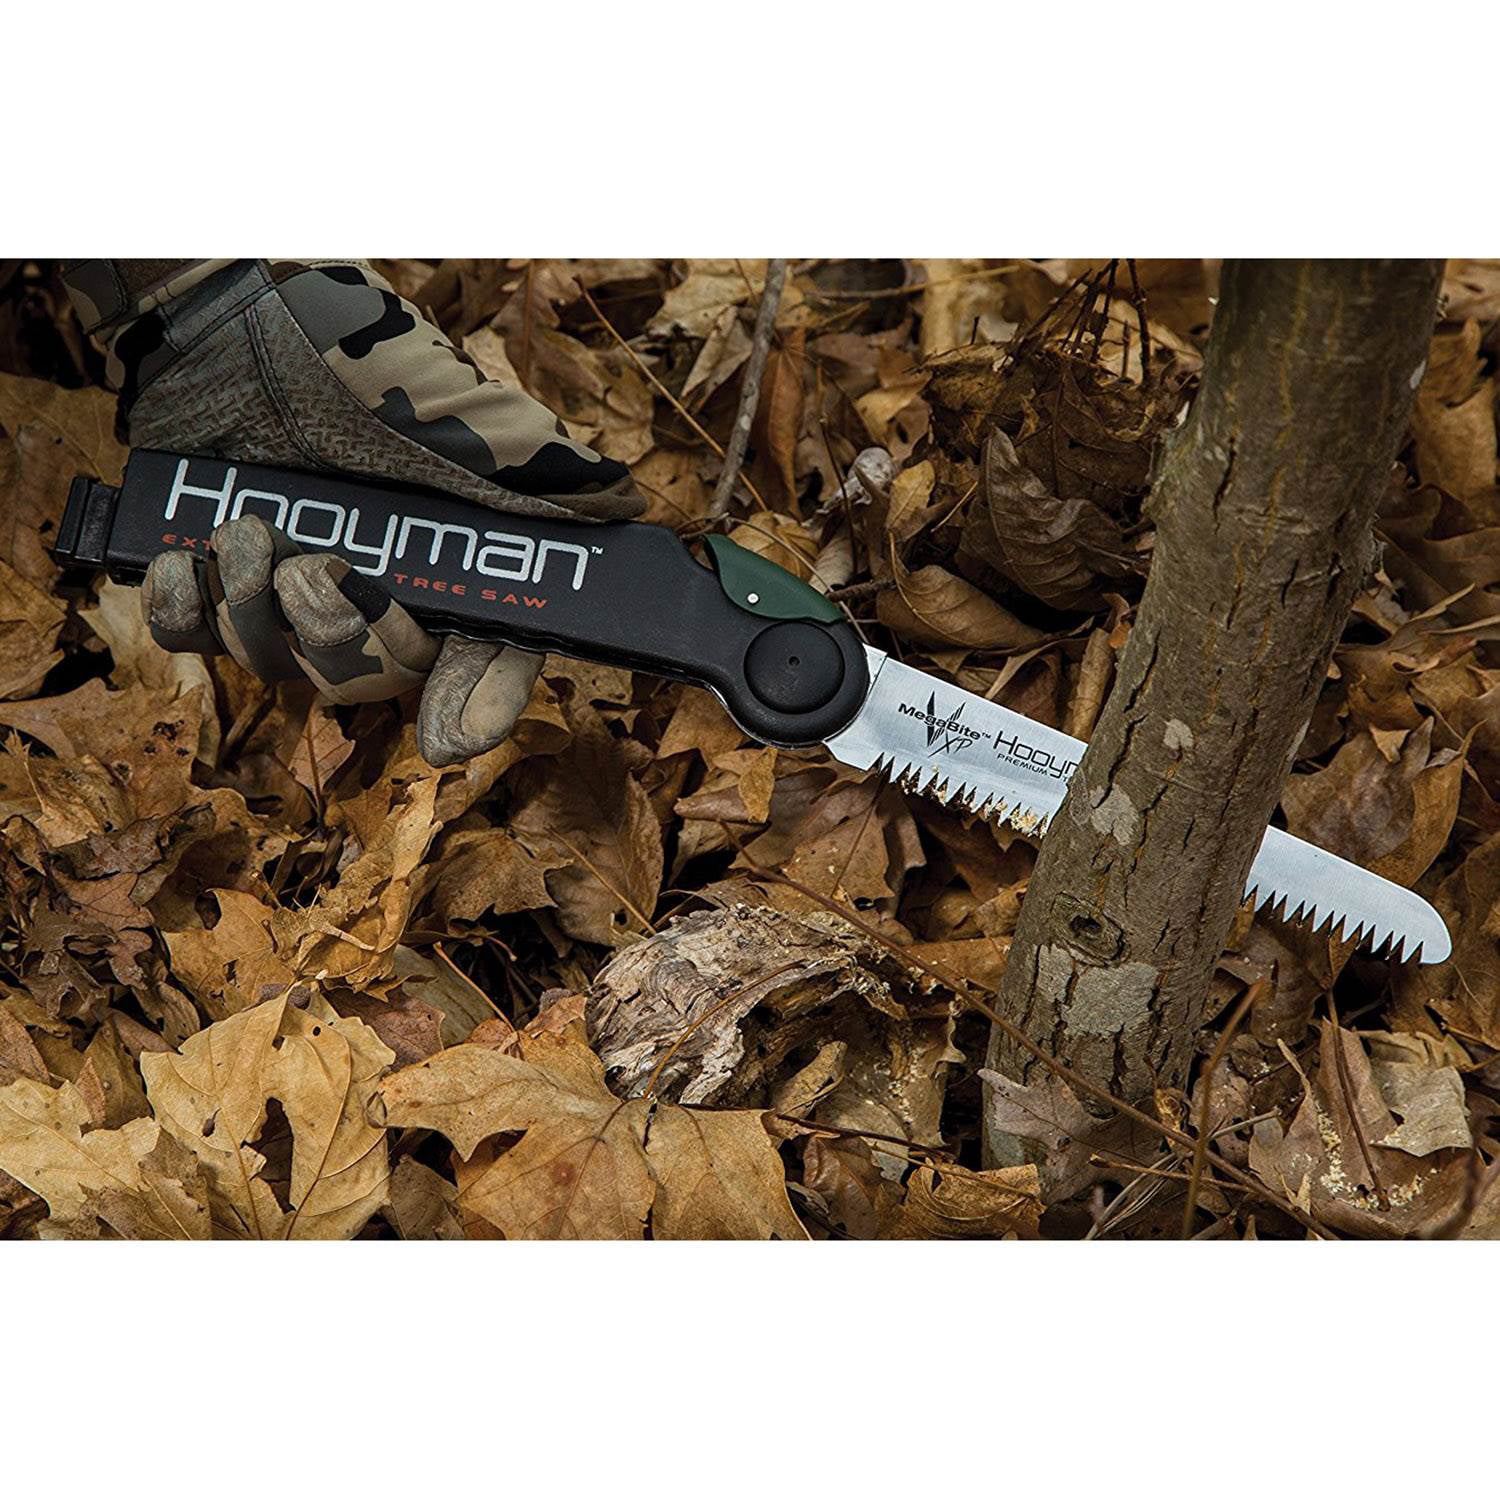 Hooyman 655226 5 Foot Extendable Tree Saw With Wrist Lanyard And Sling 